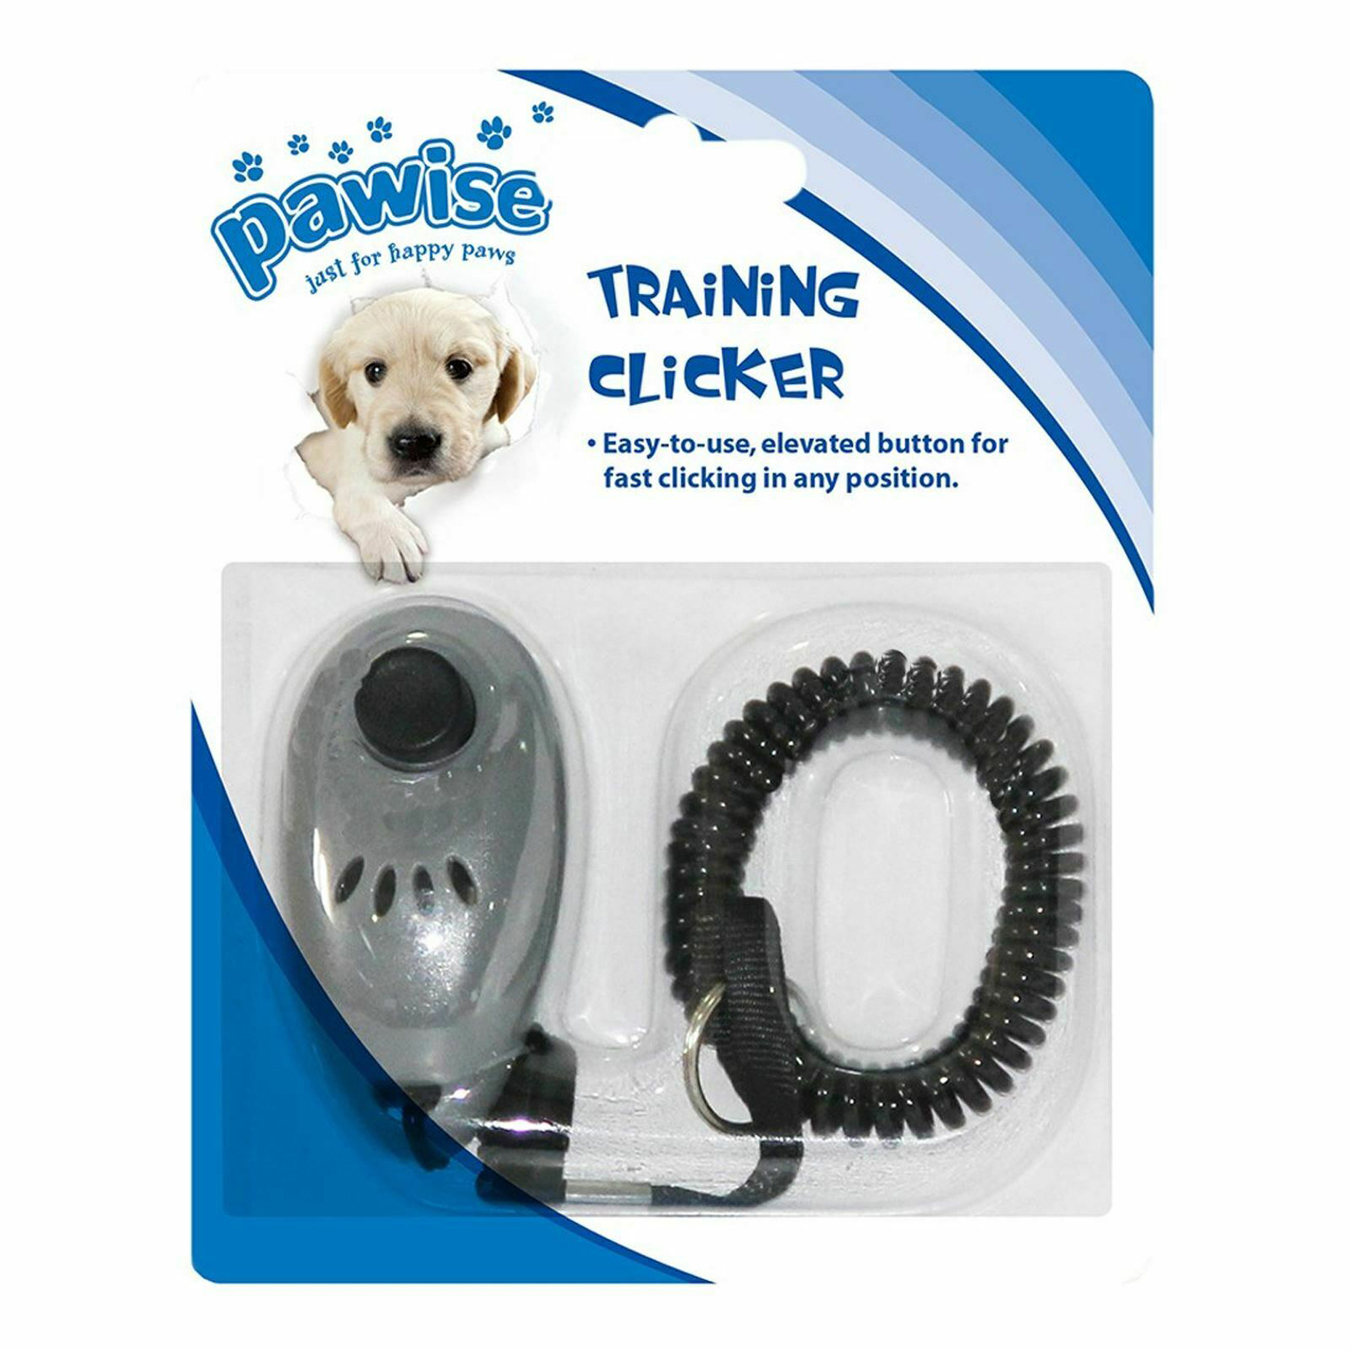 Pawise Training Clicker 7X3.5Cm